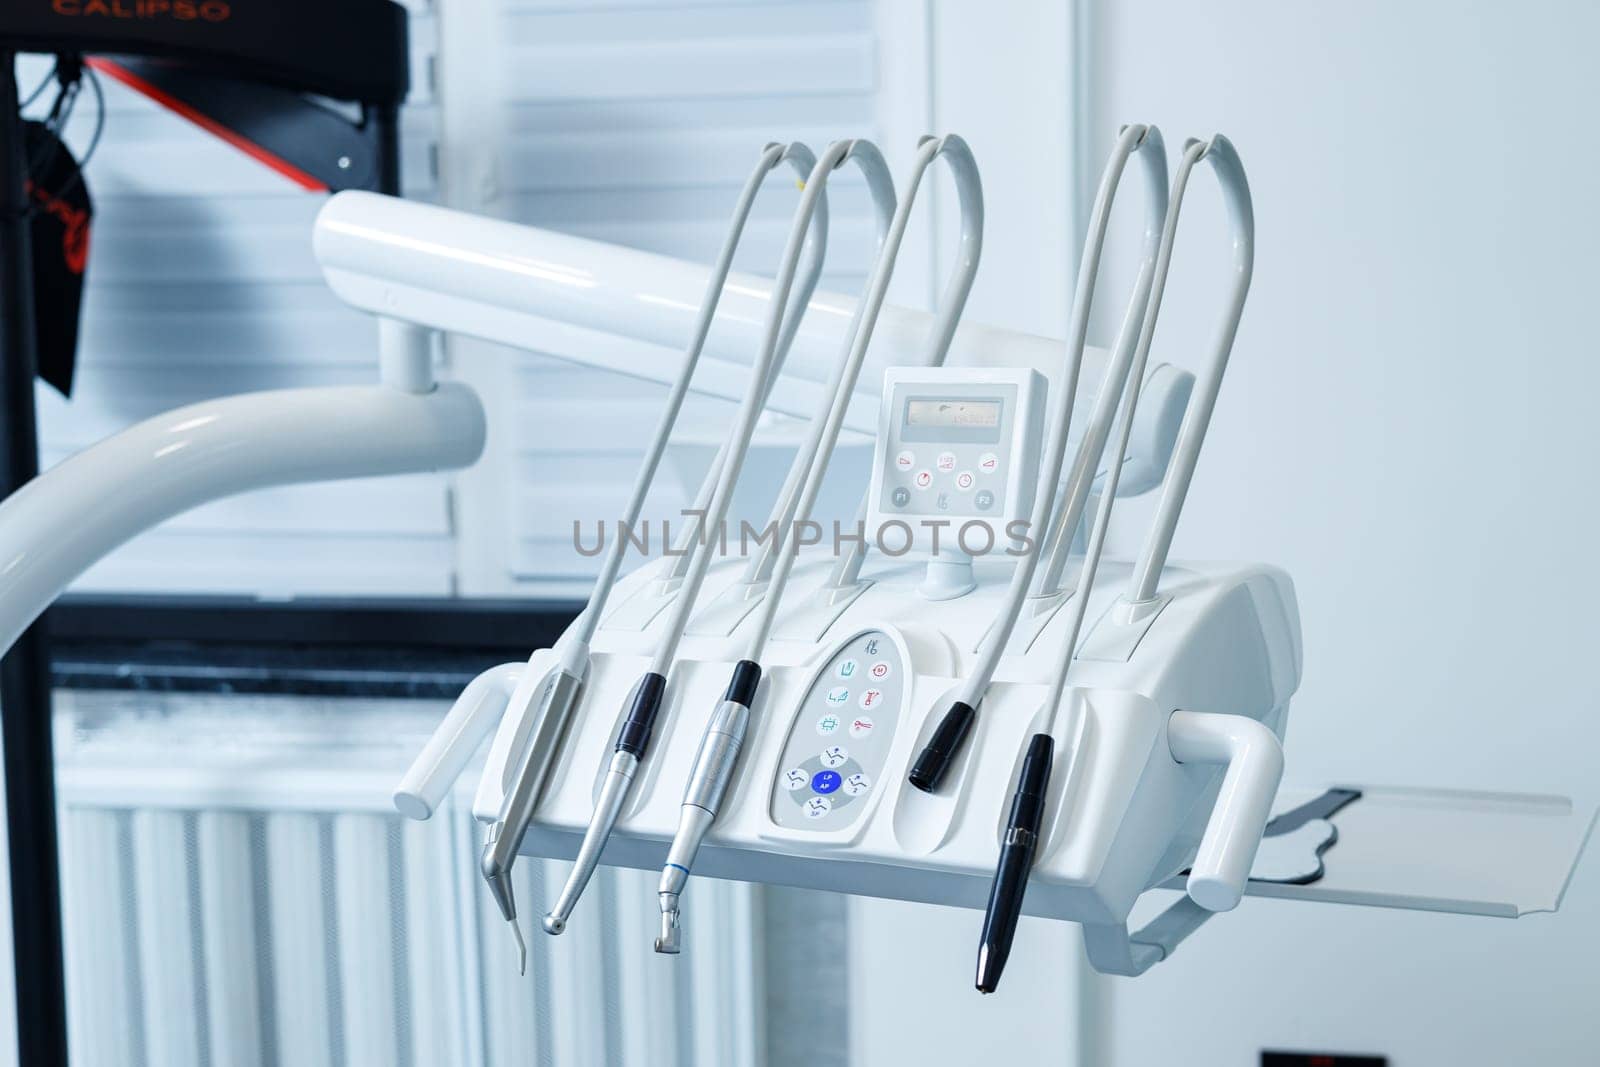 Close-up of dental chair tools. Dental Office